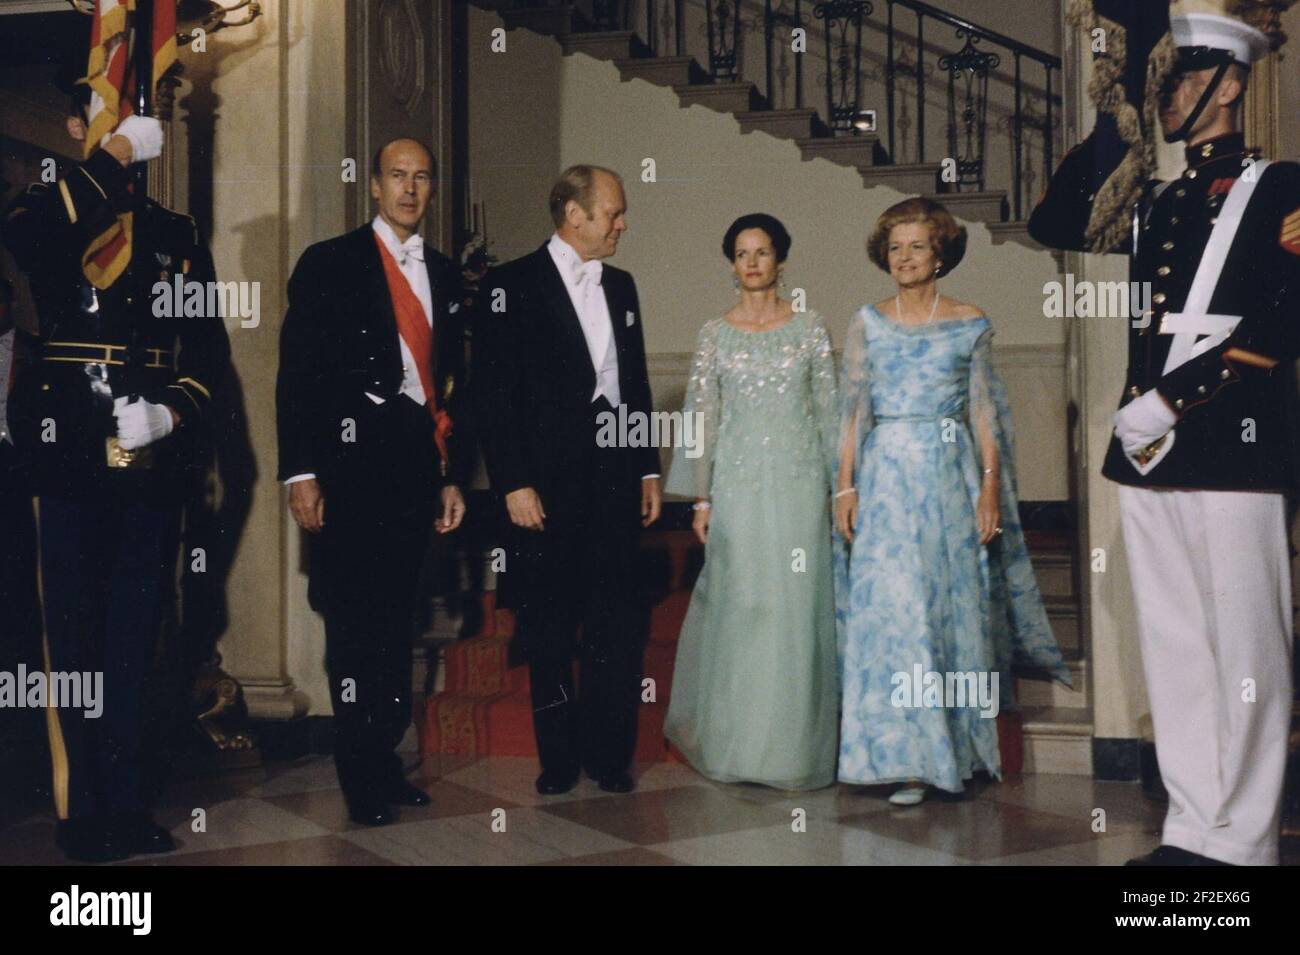 President Gerald Ford, First Lady Betty Ford, President Valéry Giscard d'Estaing, and Anne-Aymone Giscard d'Estaing (cropped). Stock Photo